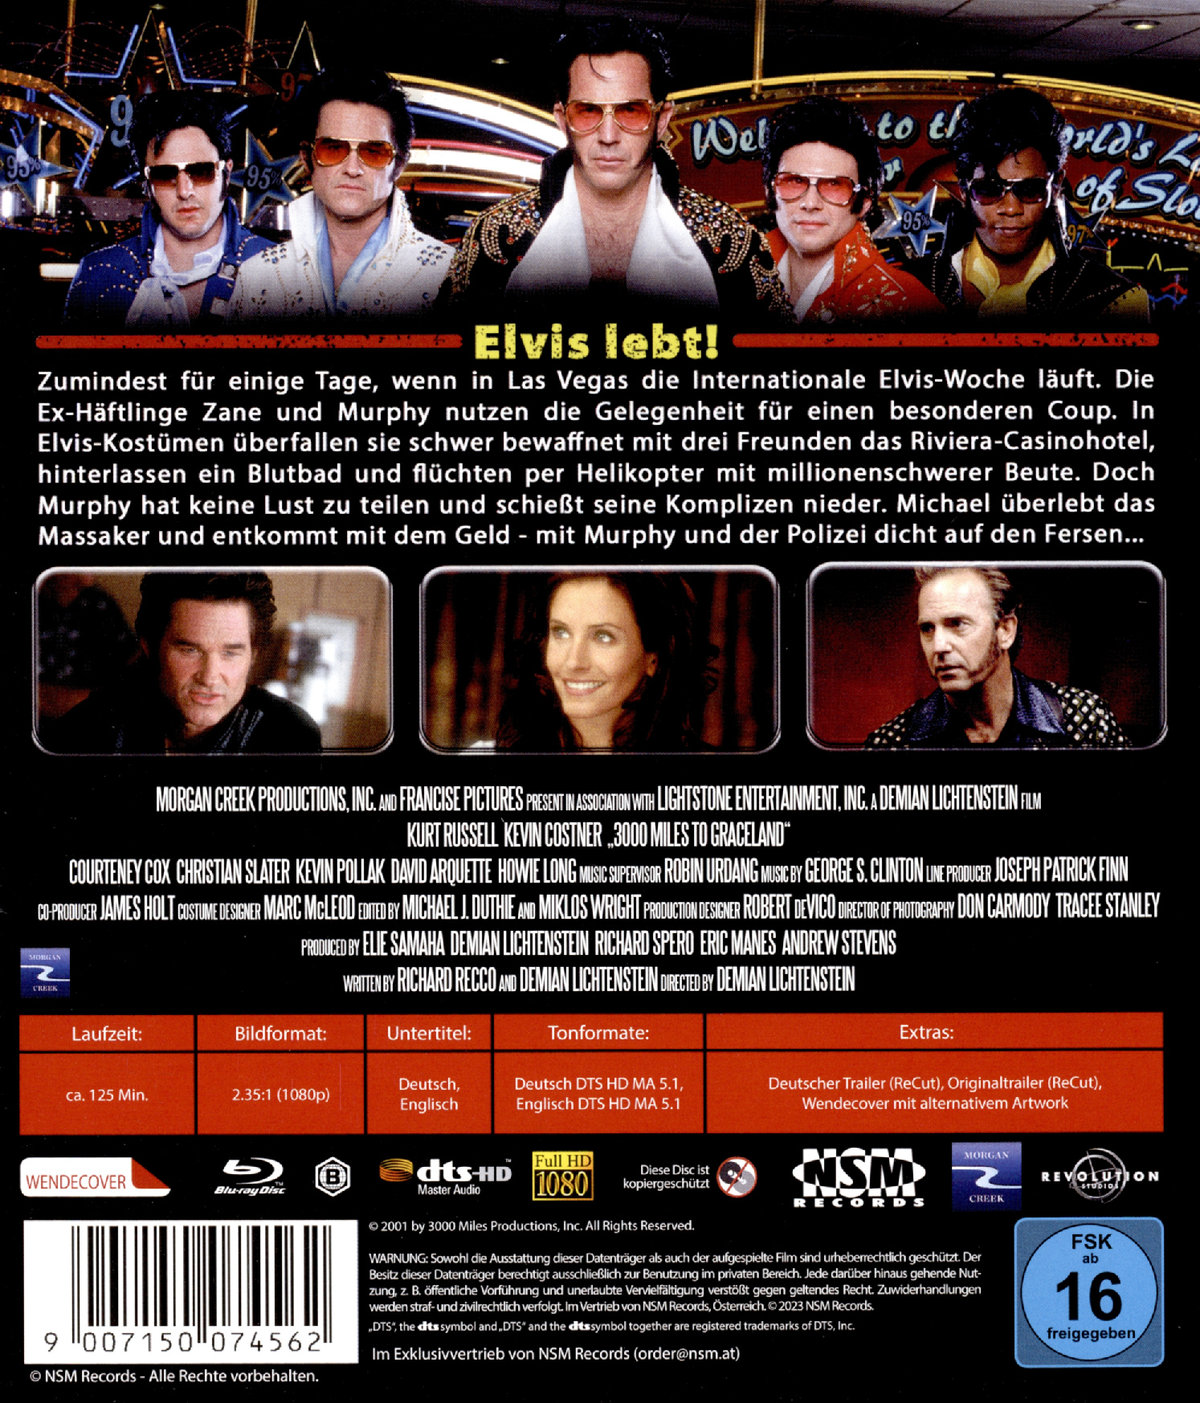 Crime is King - 3000 Miles to Graceland (blu-ray)